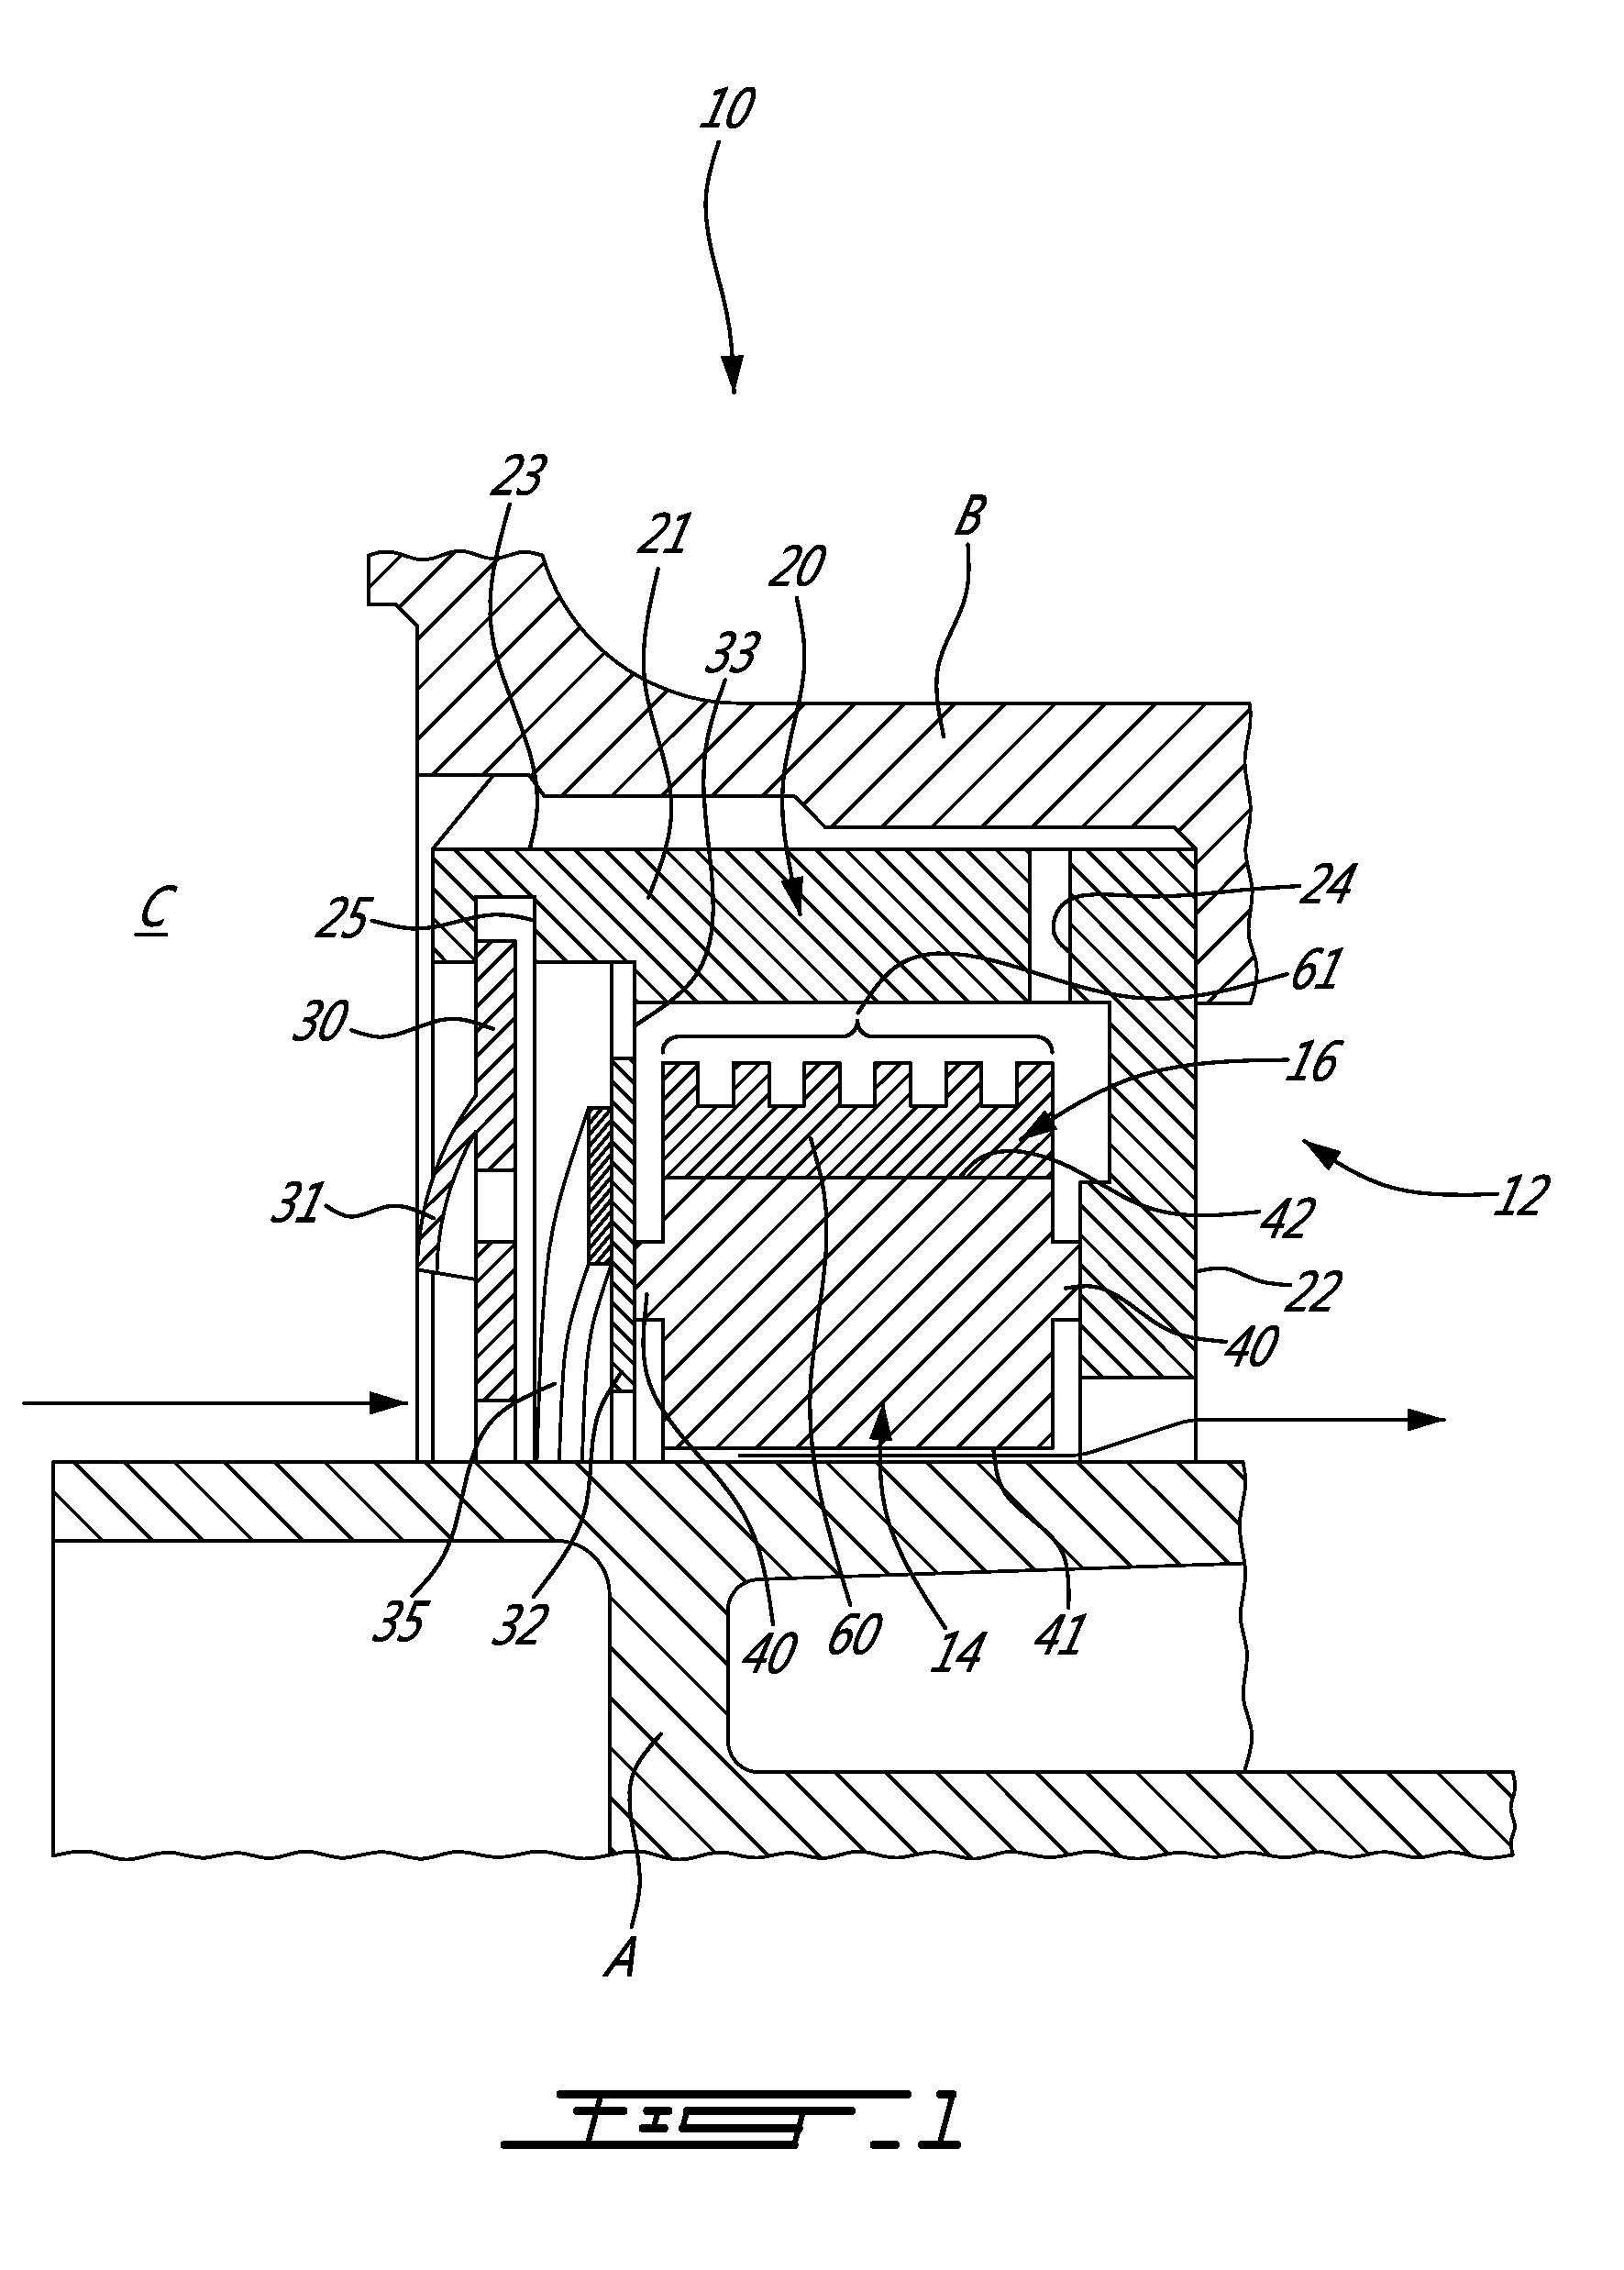 Thermally response controlled gap seal device